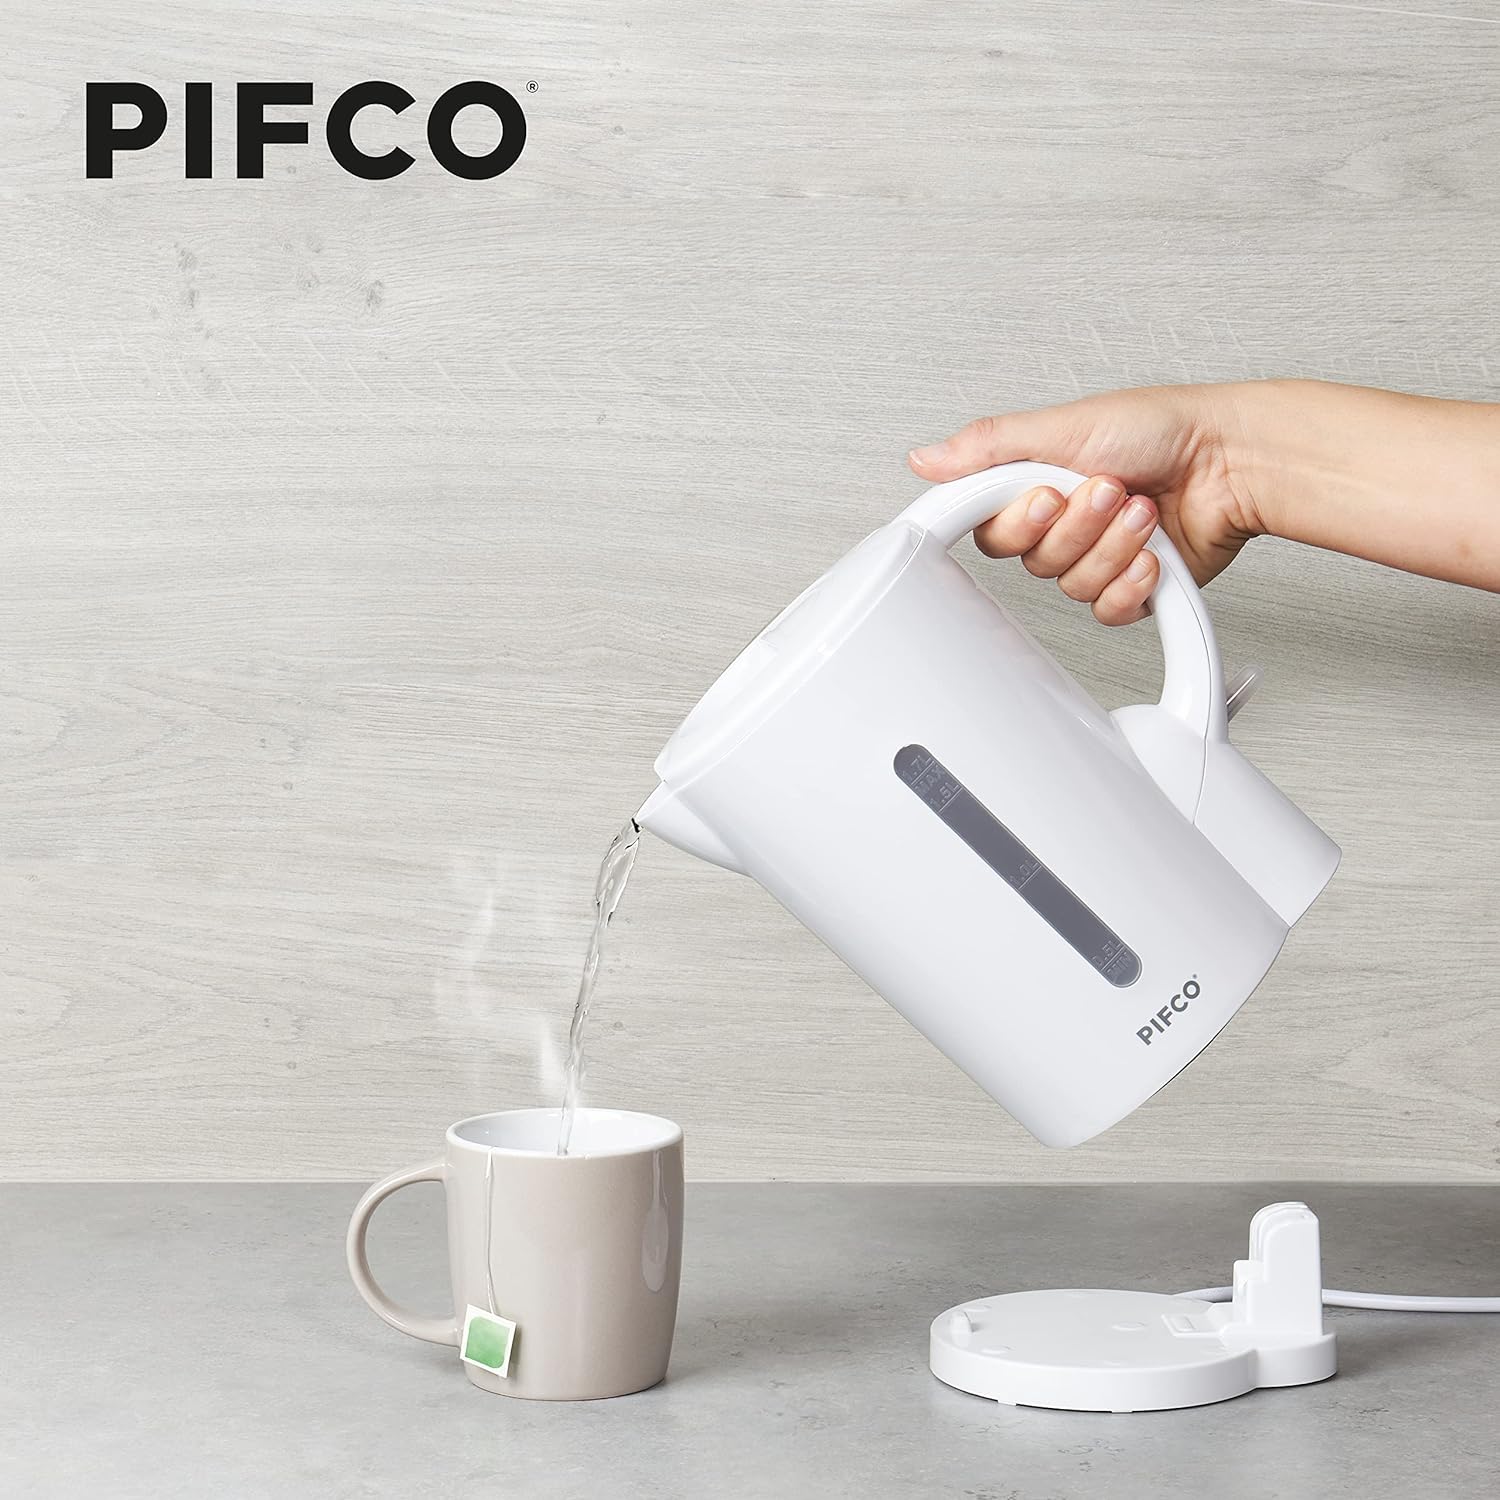 Pifco 1.7L White Kettle - Lightweight Cordless Design, 2200W Electric Kettle, Automatic Shut - off and Boil - dry Protection - Removable Anti - Scale Filter - Easy To Use - Ideal For Small Kitchen - Amazing Gadgets Outlet